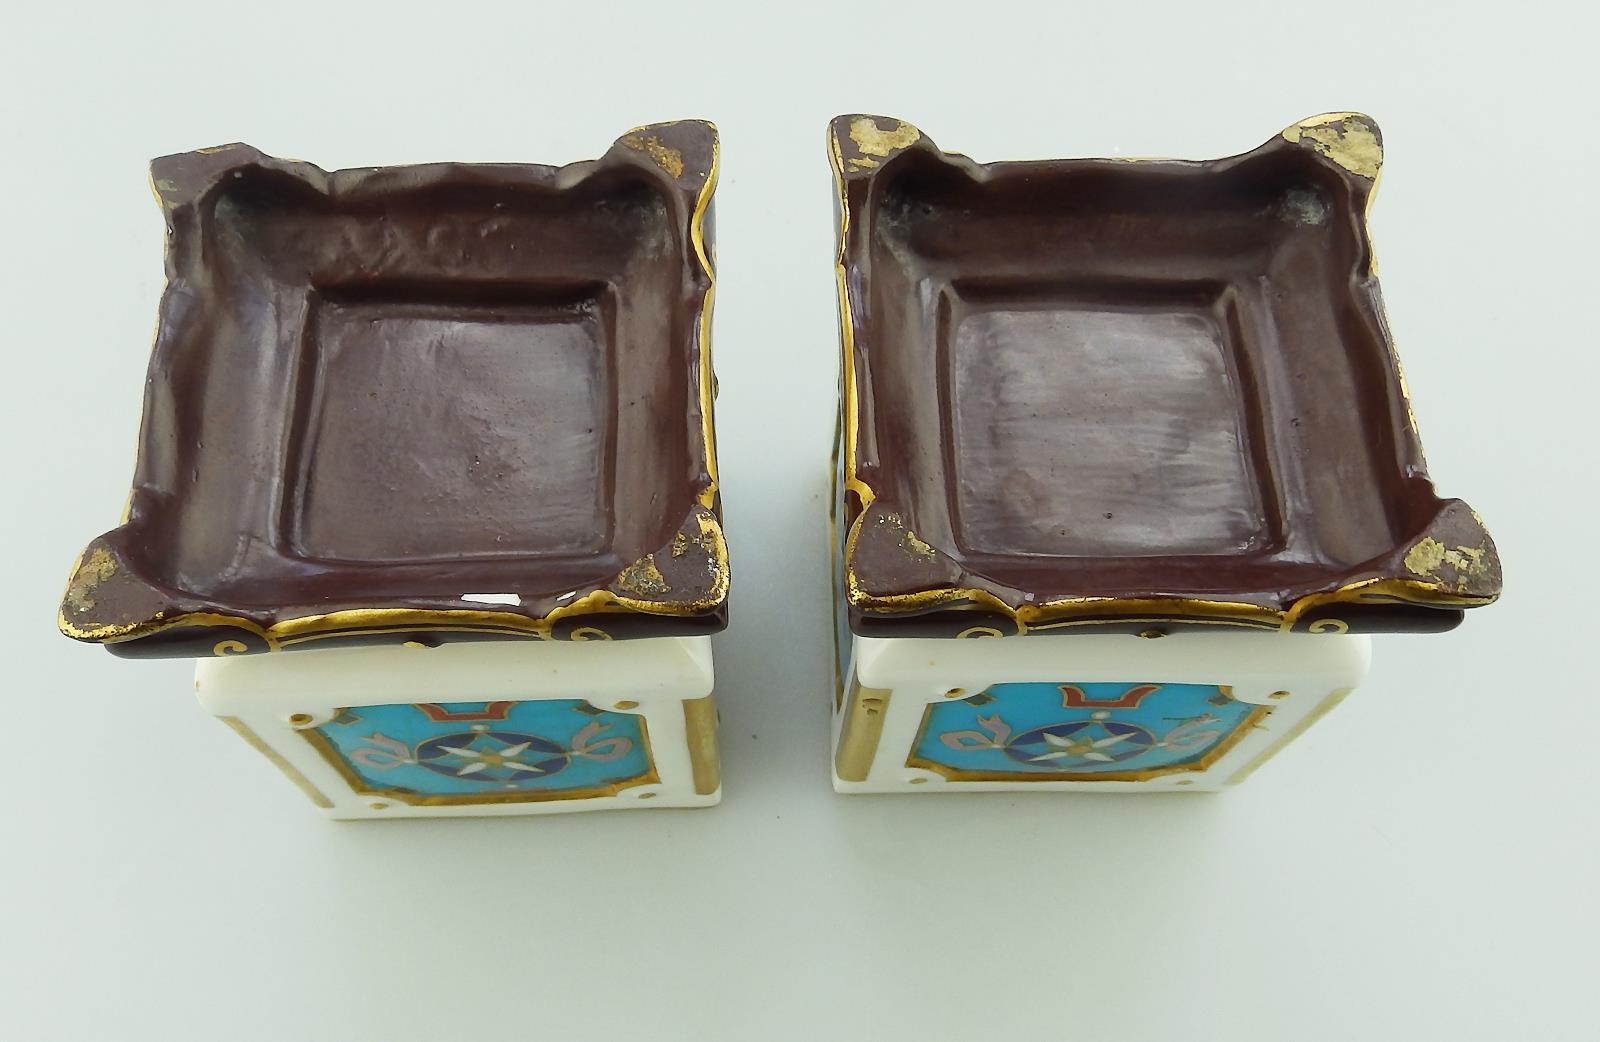 A pair of Minton porcelain miniature Boxes designed by Christopher Dresser 19thC - Image 8 of 9